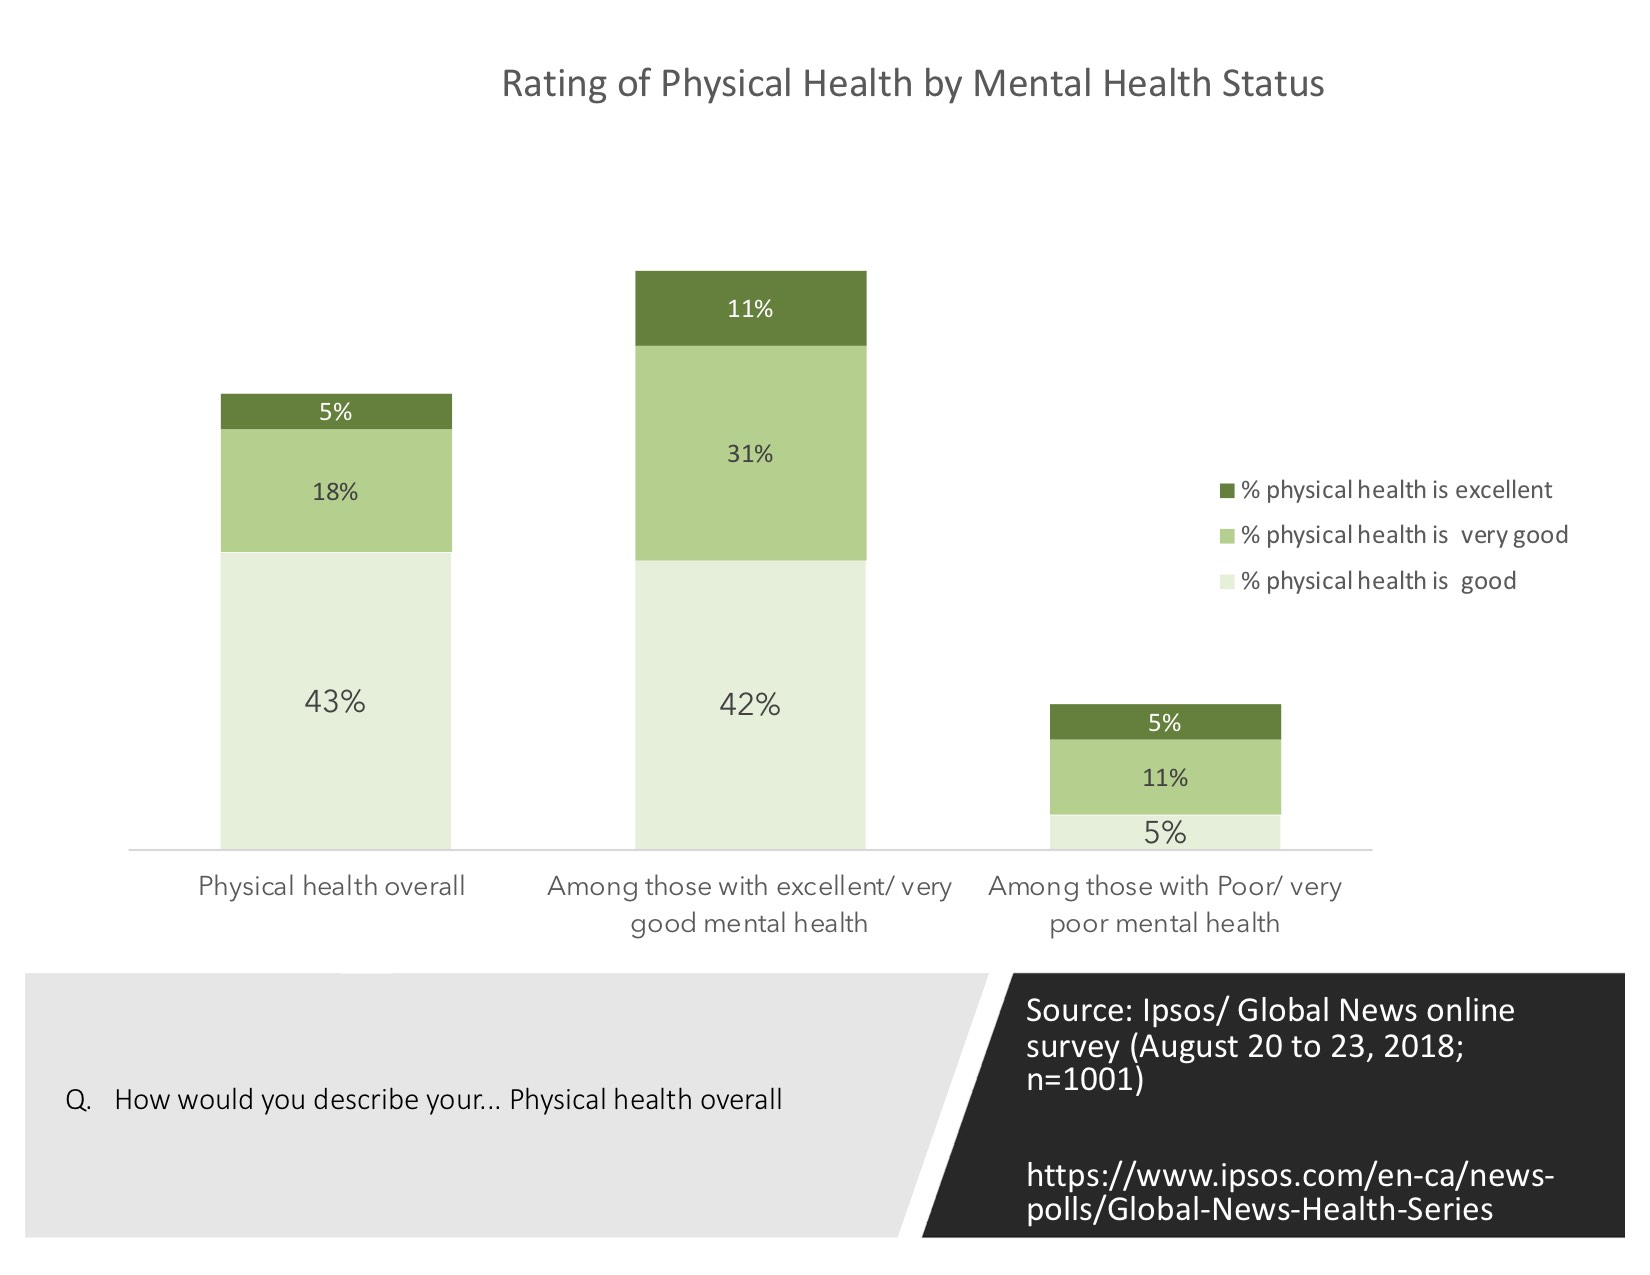 Impact of Mental Health on Physical Health